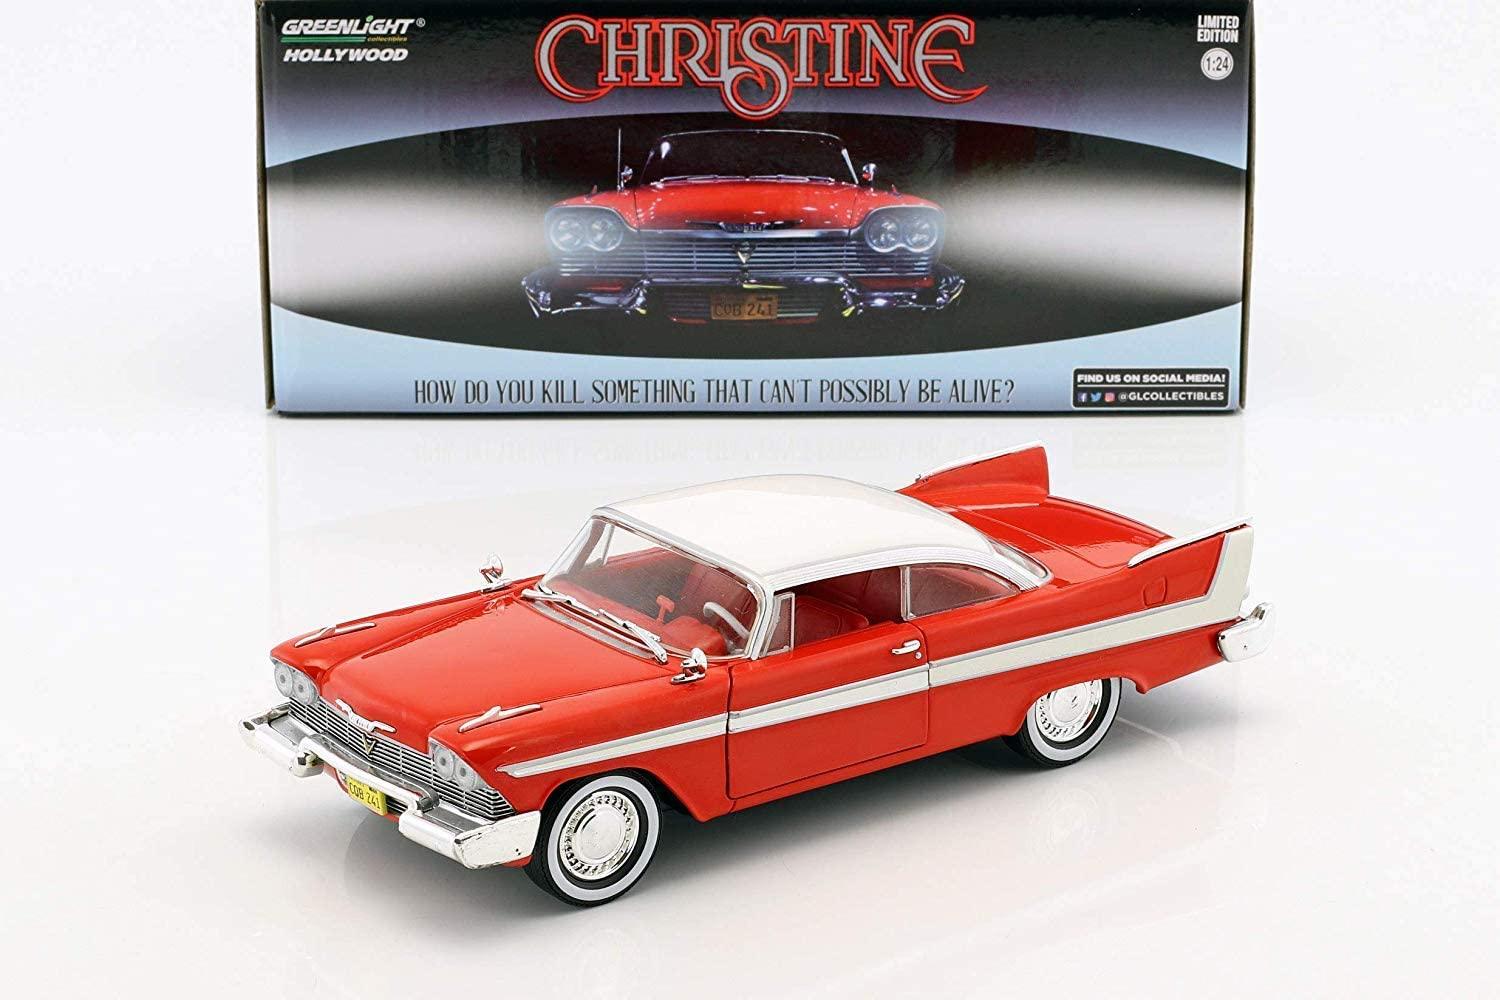 From the film Christine, 1958 Plymouth Fury in red 1:24 scale model from Greenlight, limited edition model